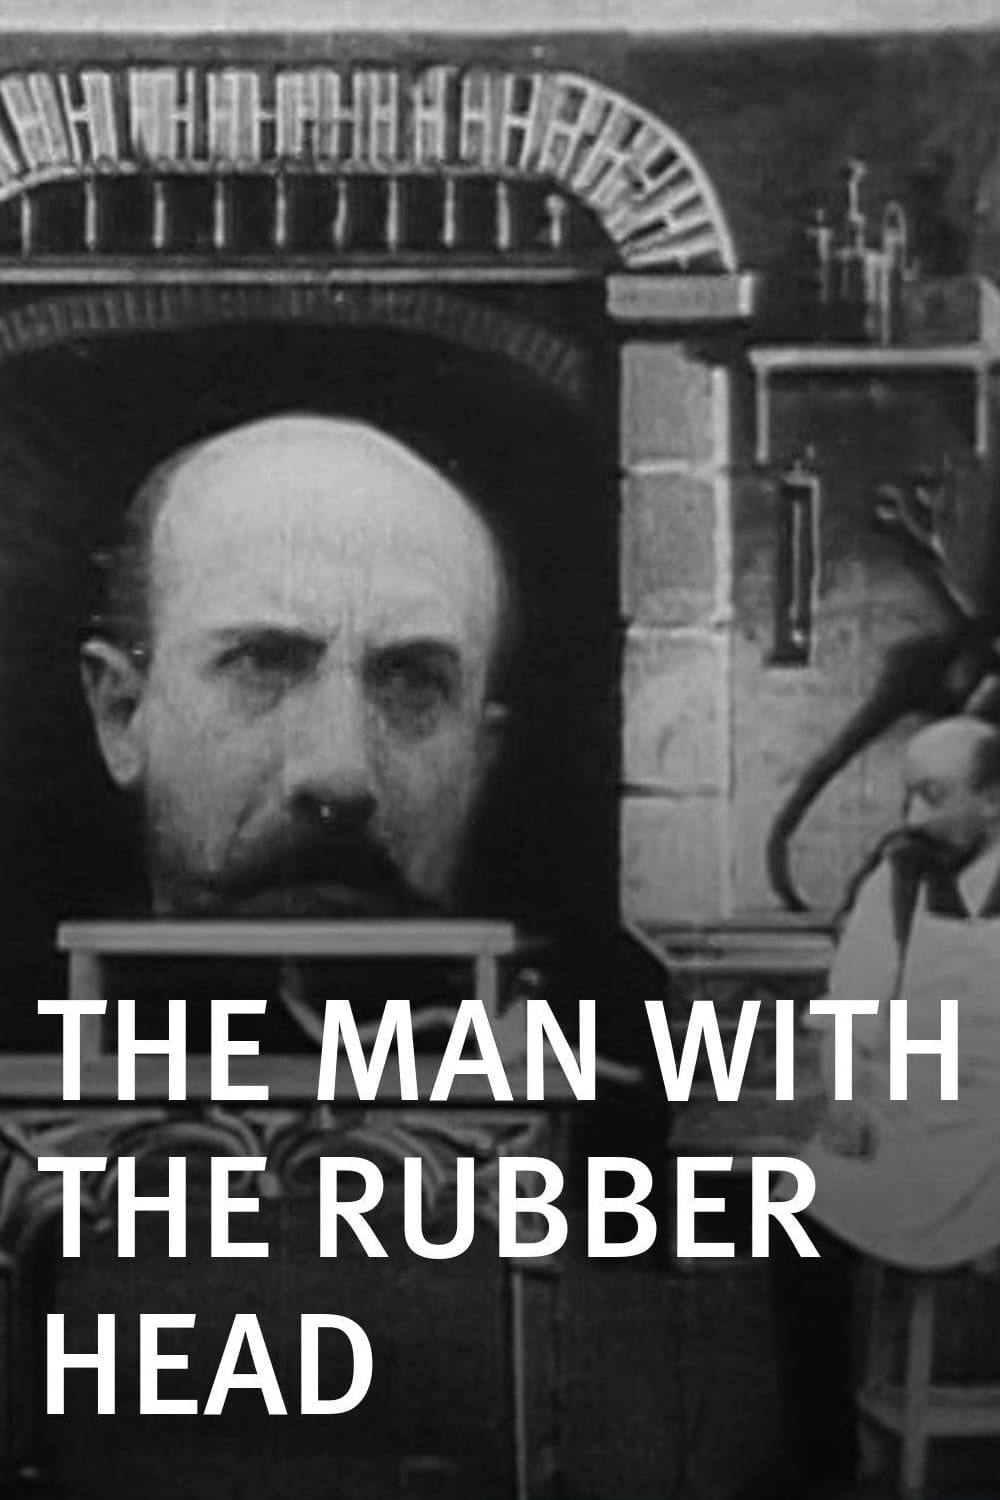 The Man with the Rubber Head